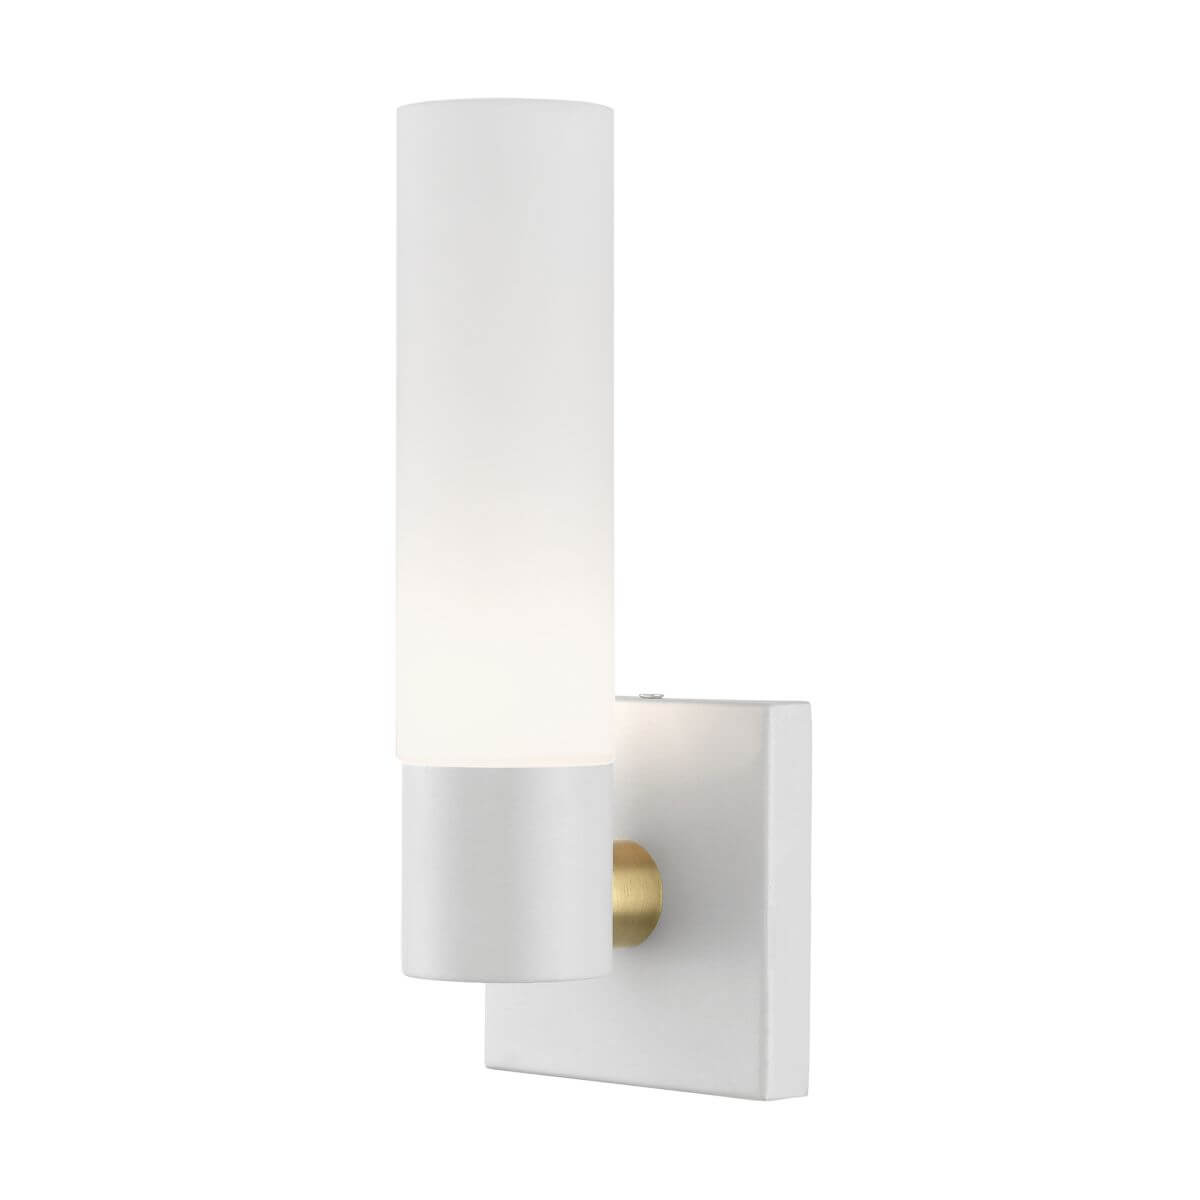 Livex 10101-13 Aero 1 Light 11 inch Tall Wall Sconce in Textured White-Antique Brass Accent with Hand Blown Satin Opal White Twist Lock Glass